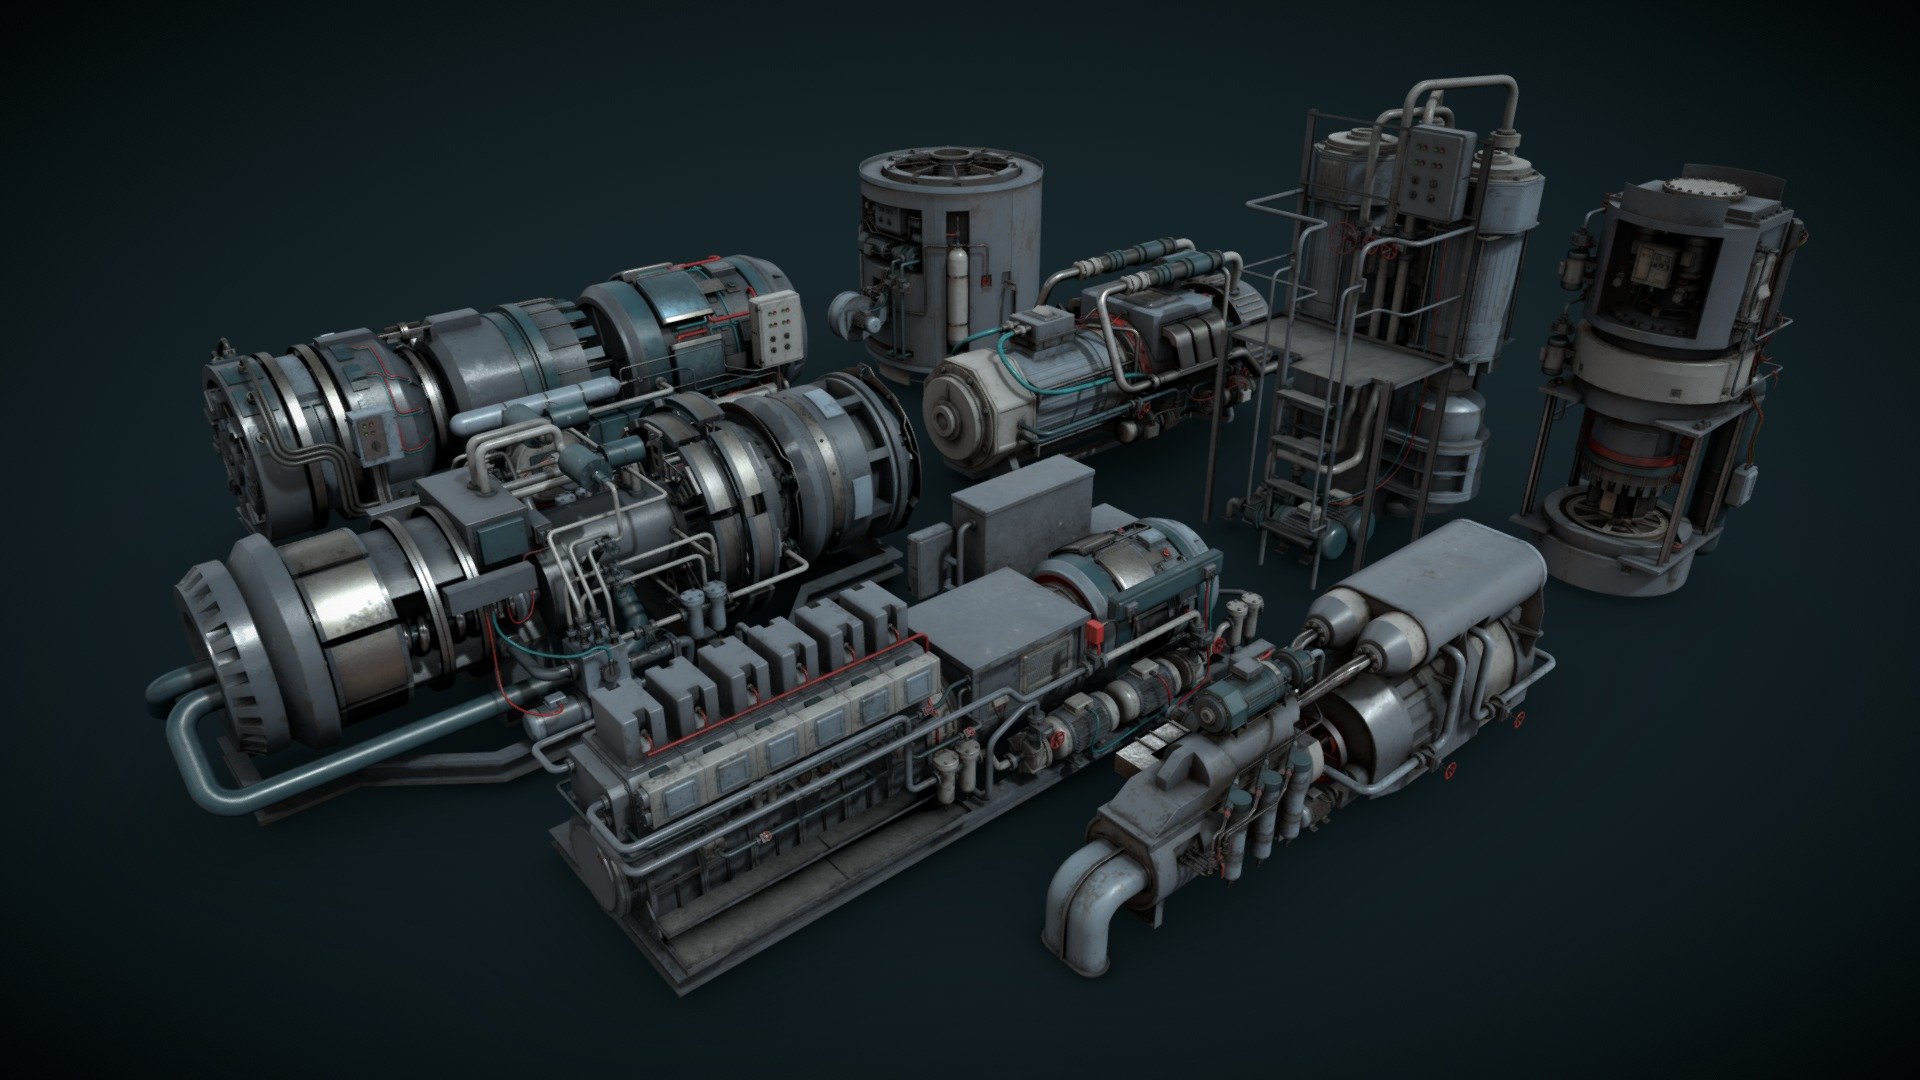 8 models of machinery devices for industrial visualizations 

Painted and heavy rusted PBR textures included 

Non overlapping UVs 3d model